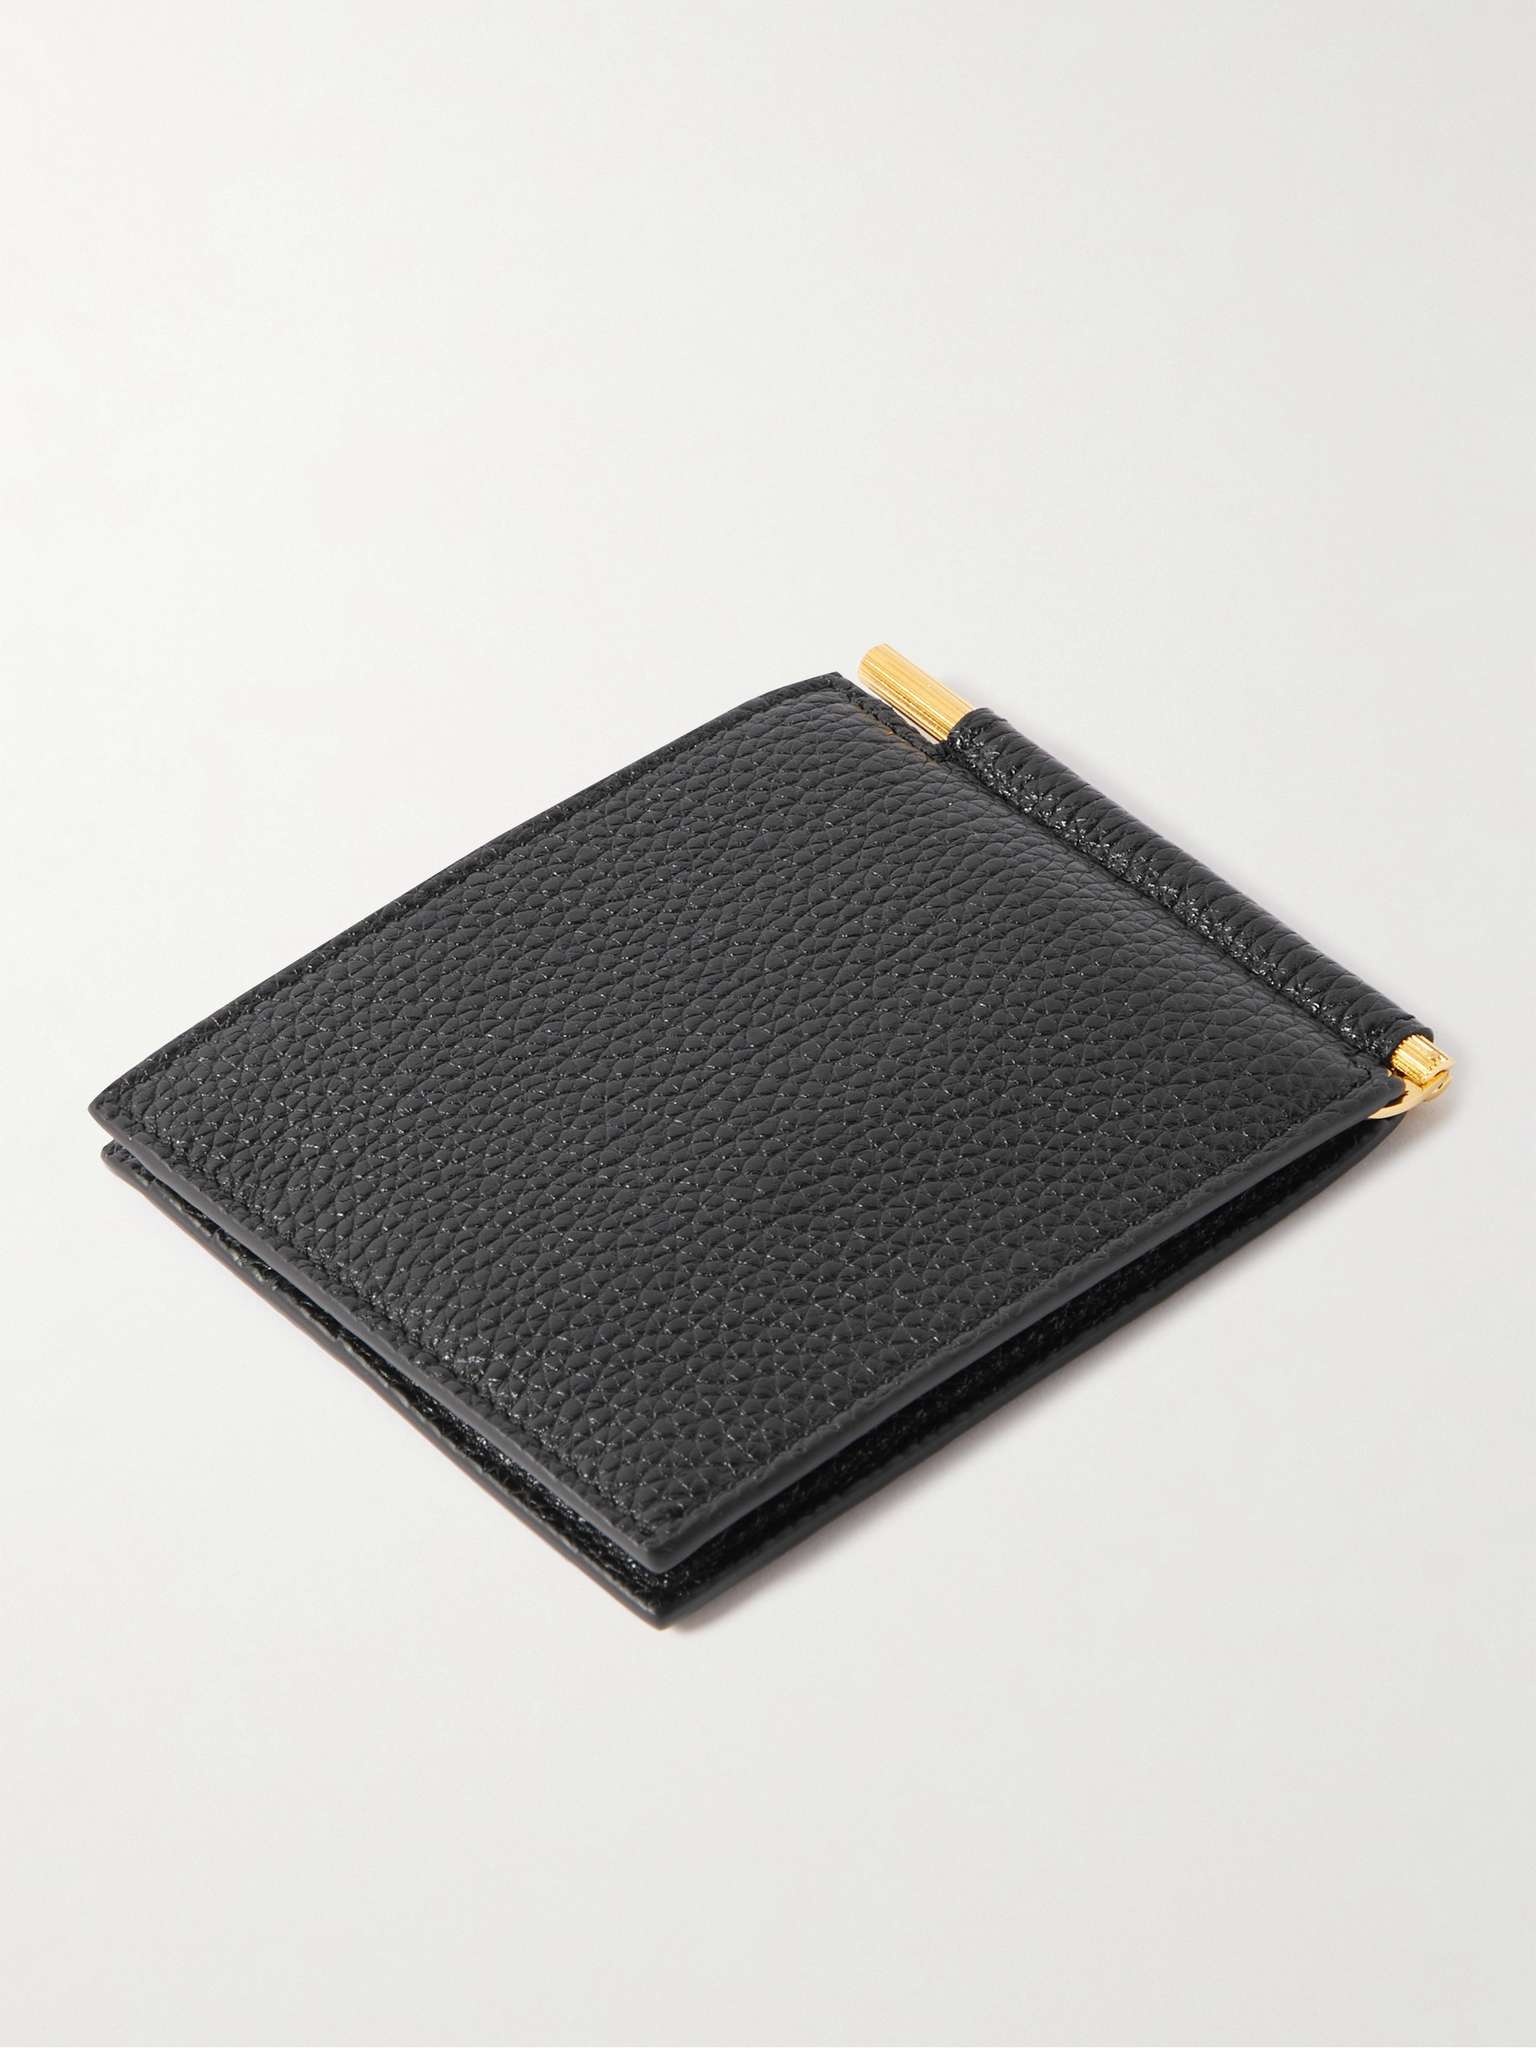 Full-Grain Leather Billfold Wallet with Money Clip - 3